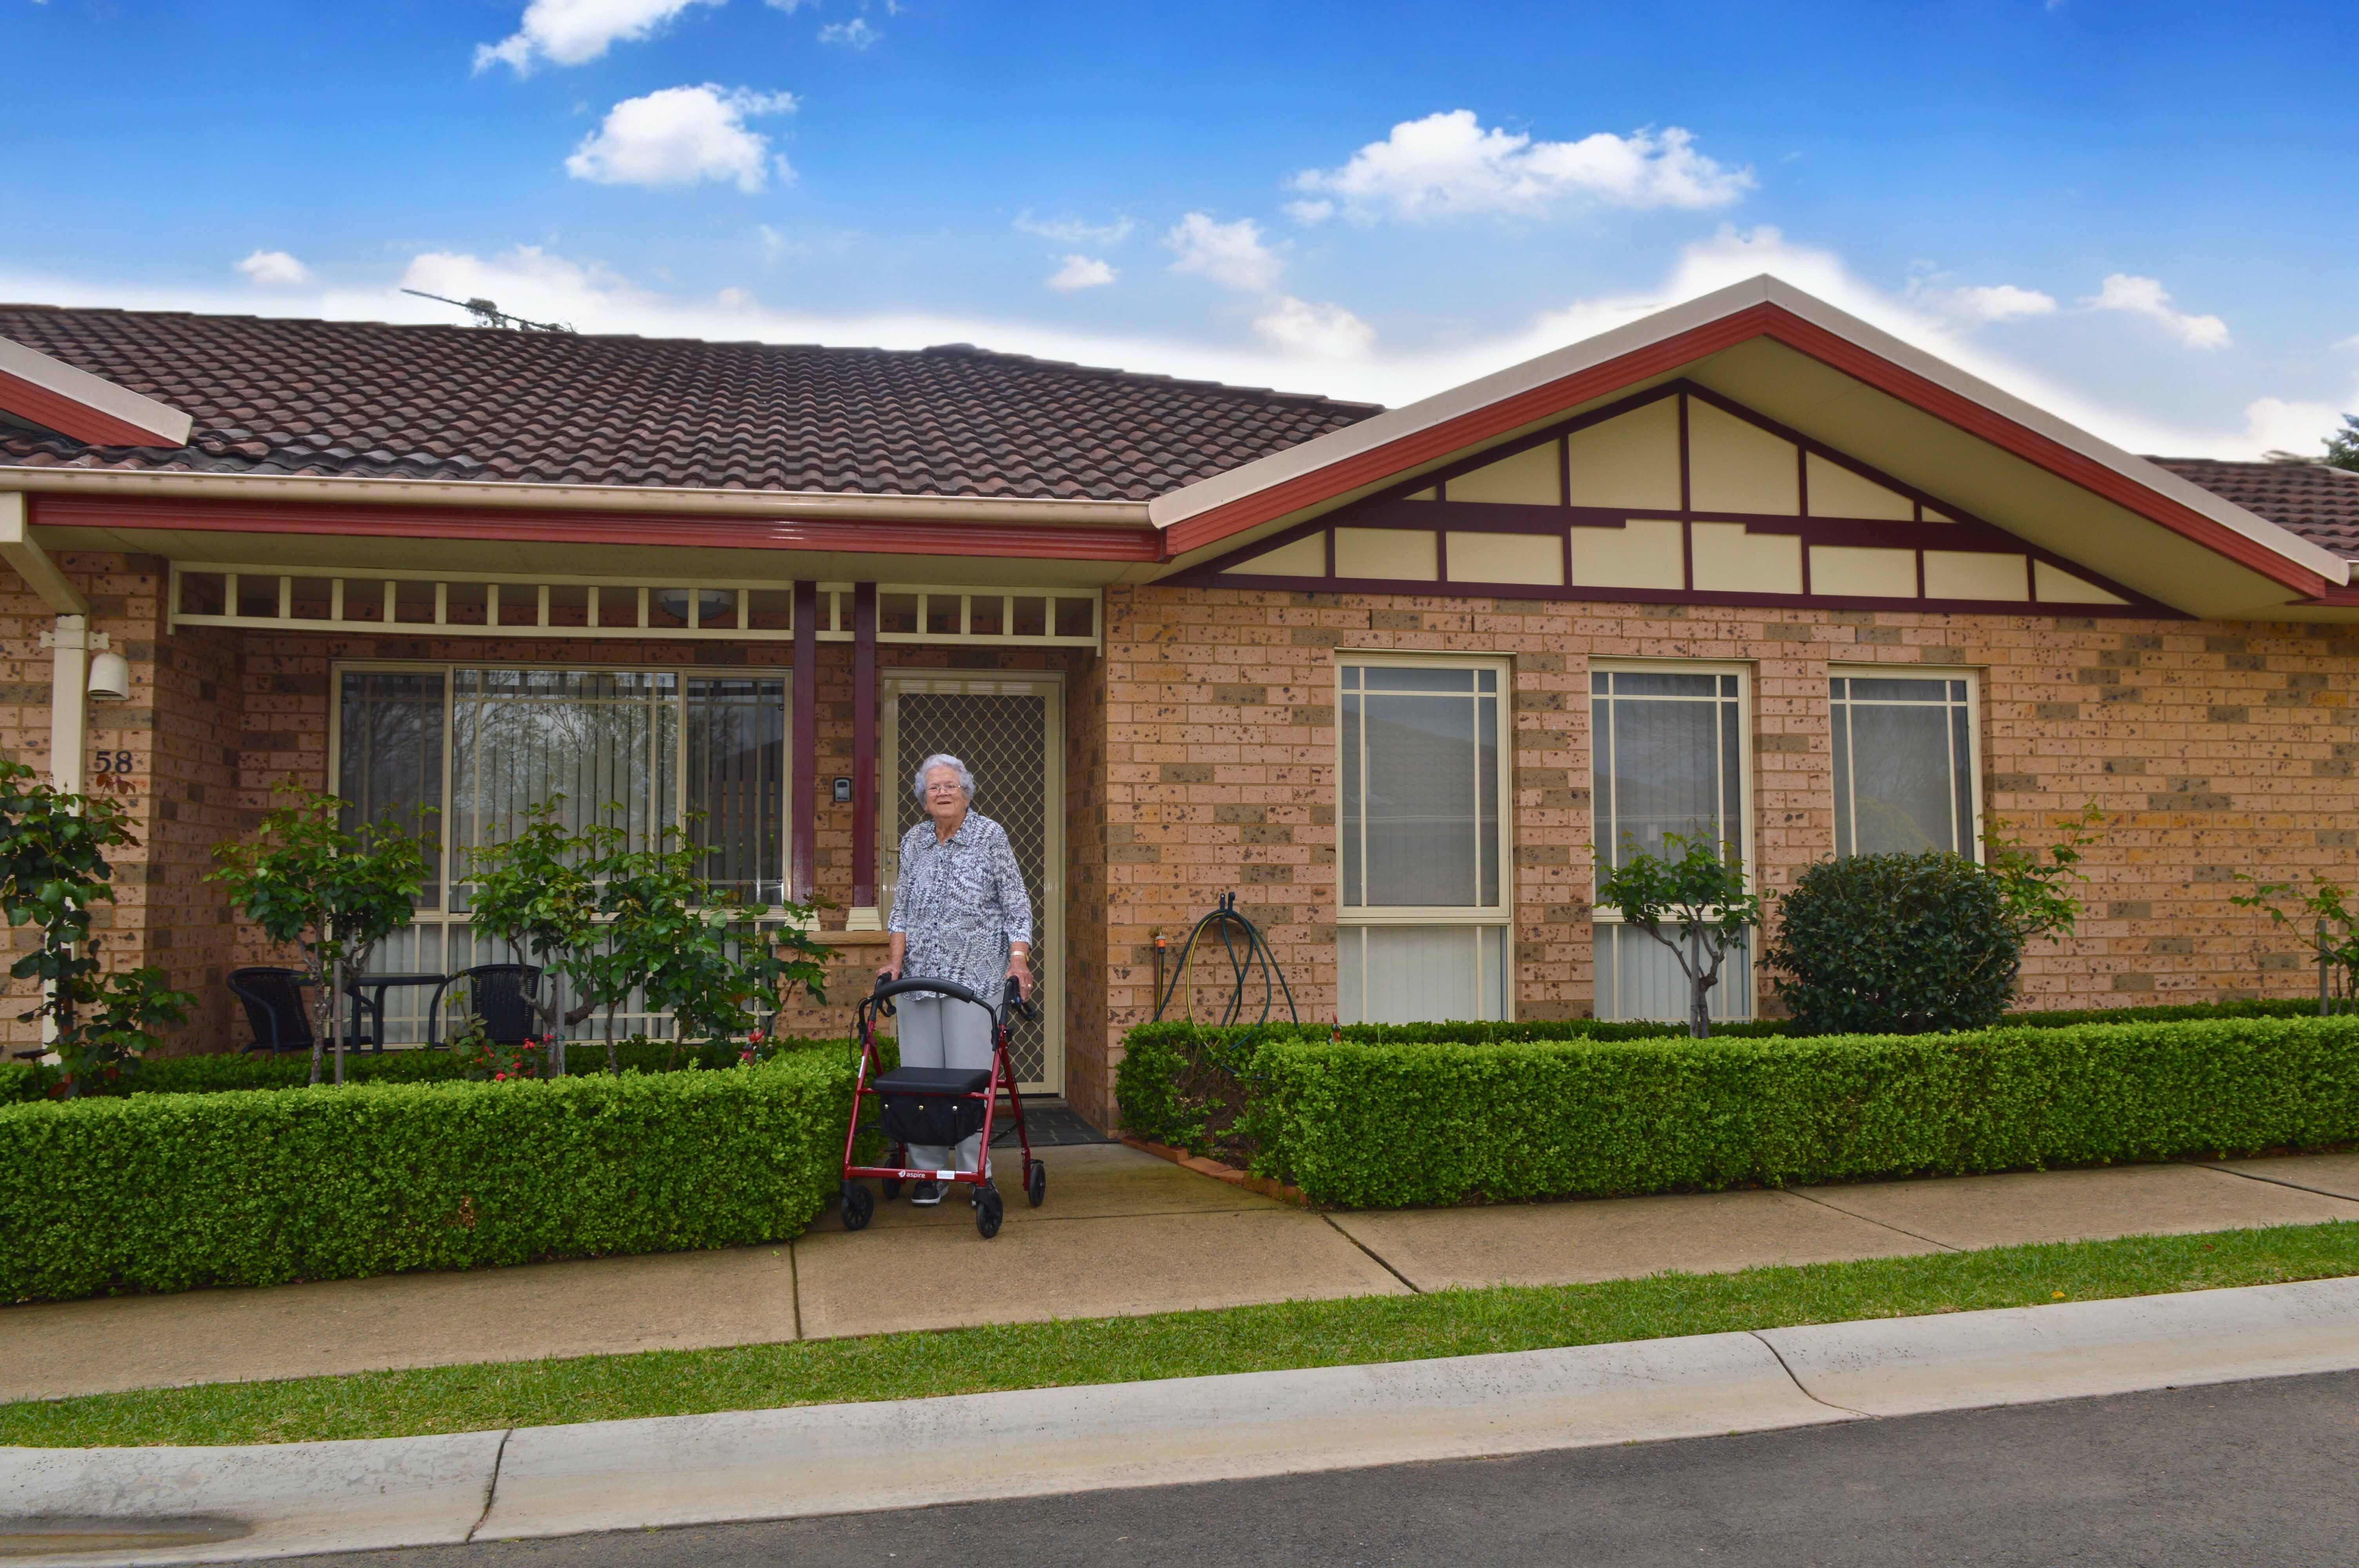 Patricia downsized from a large family home to a three-bedroom house (pictured) at Angus Bristow Retirement Village in Elderslie.